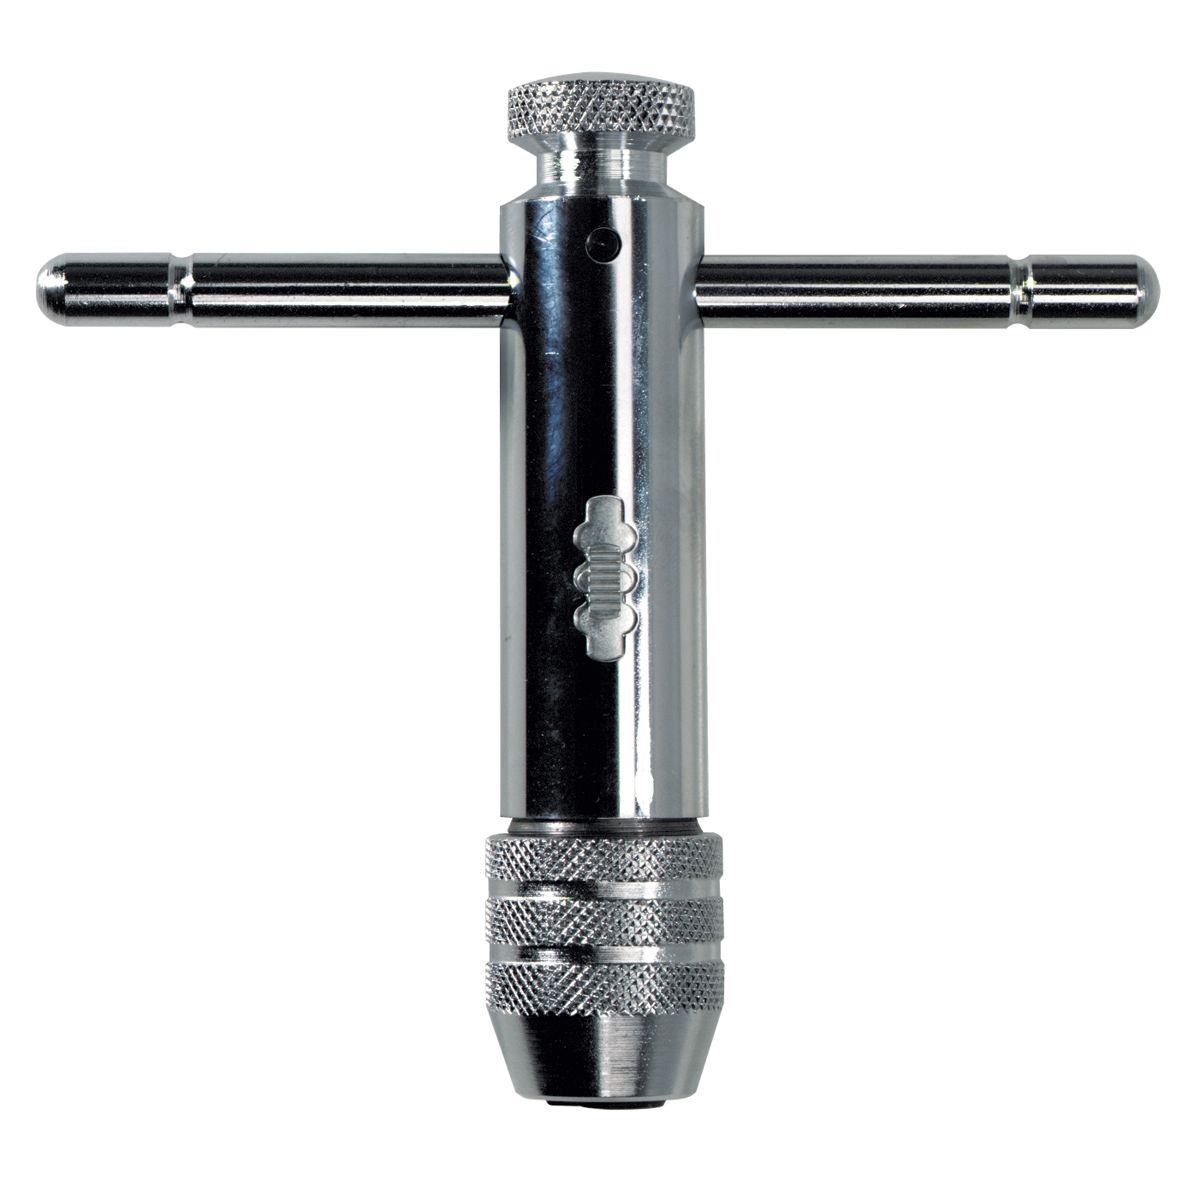 For Taps 1/4" to 1/2" (6mm to 12mm) T-Handle Ratcheting Tap Wren